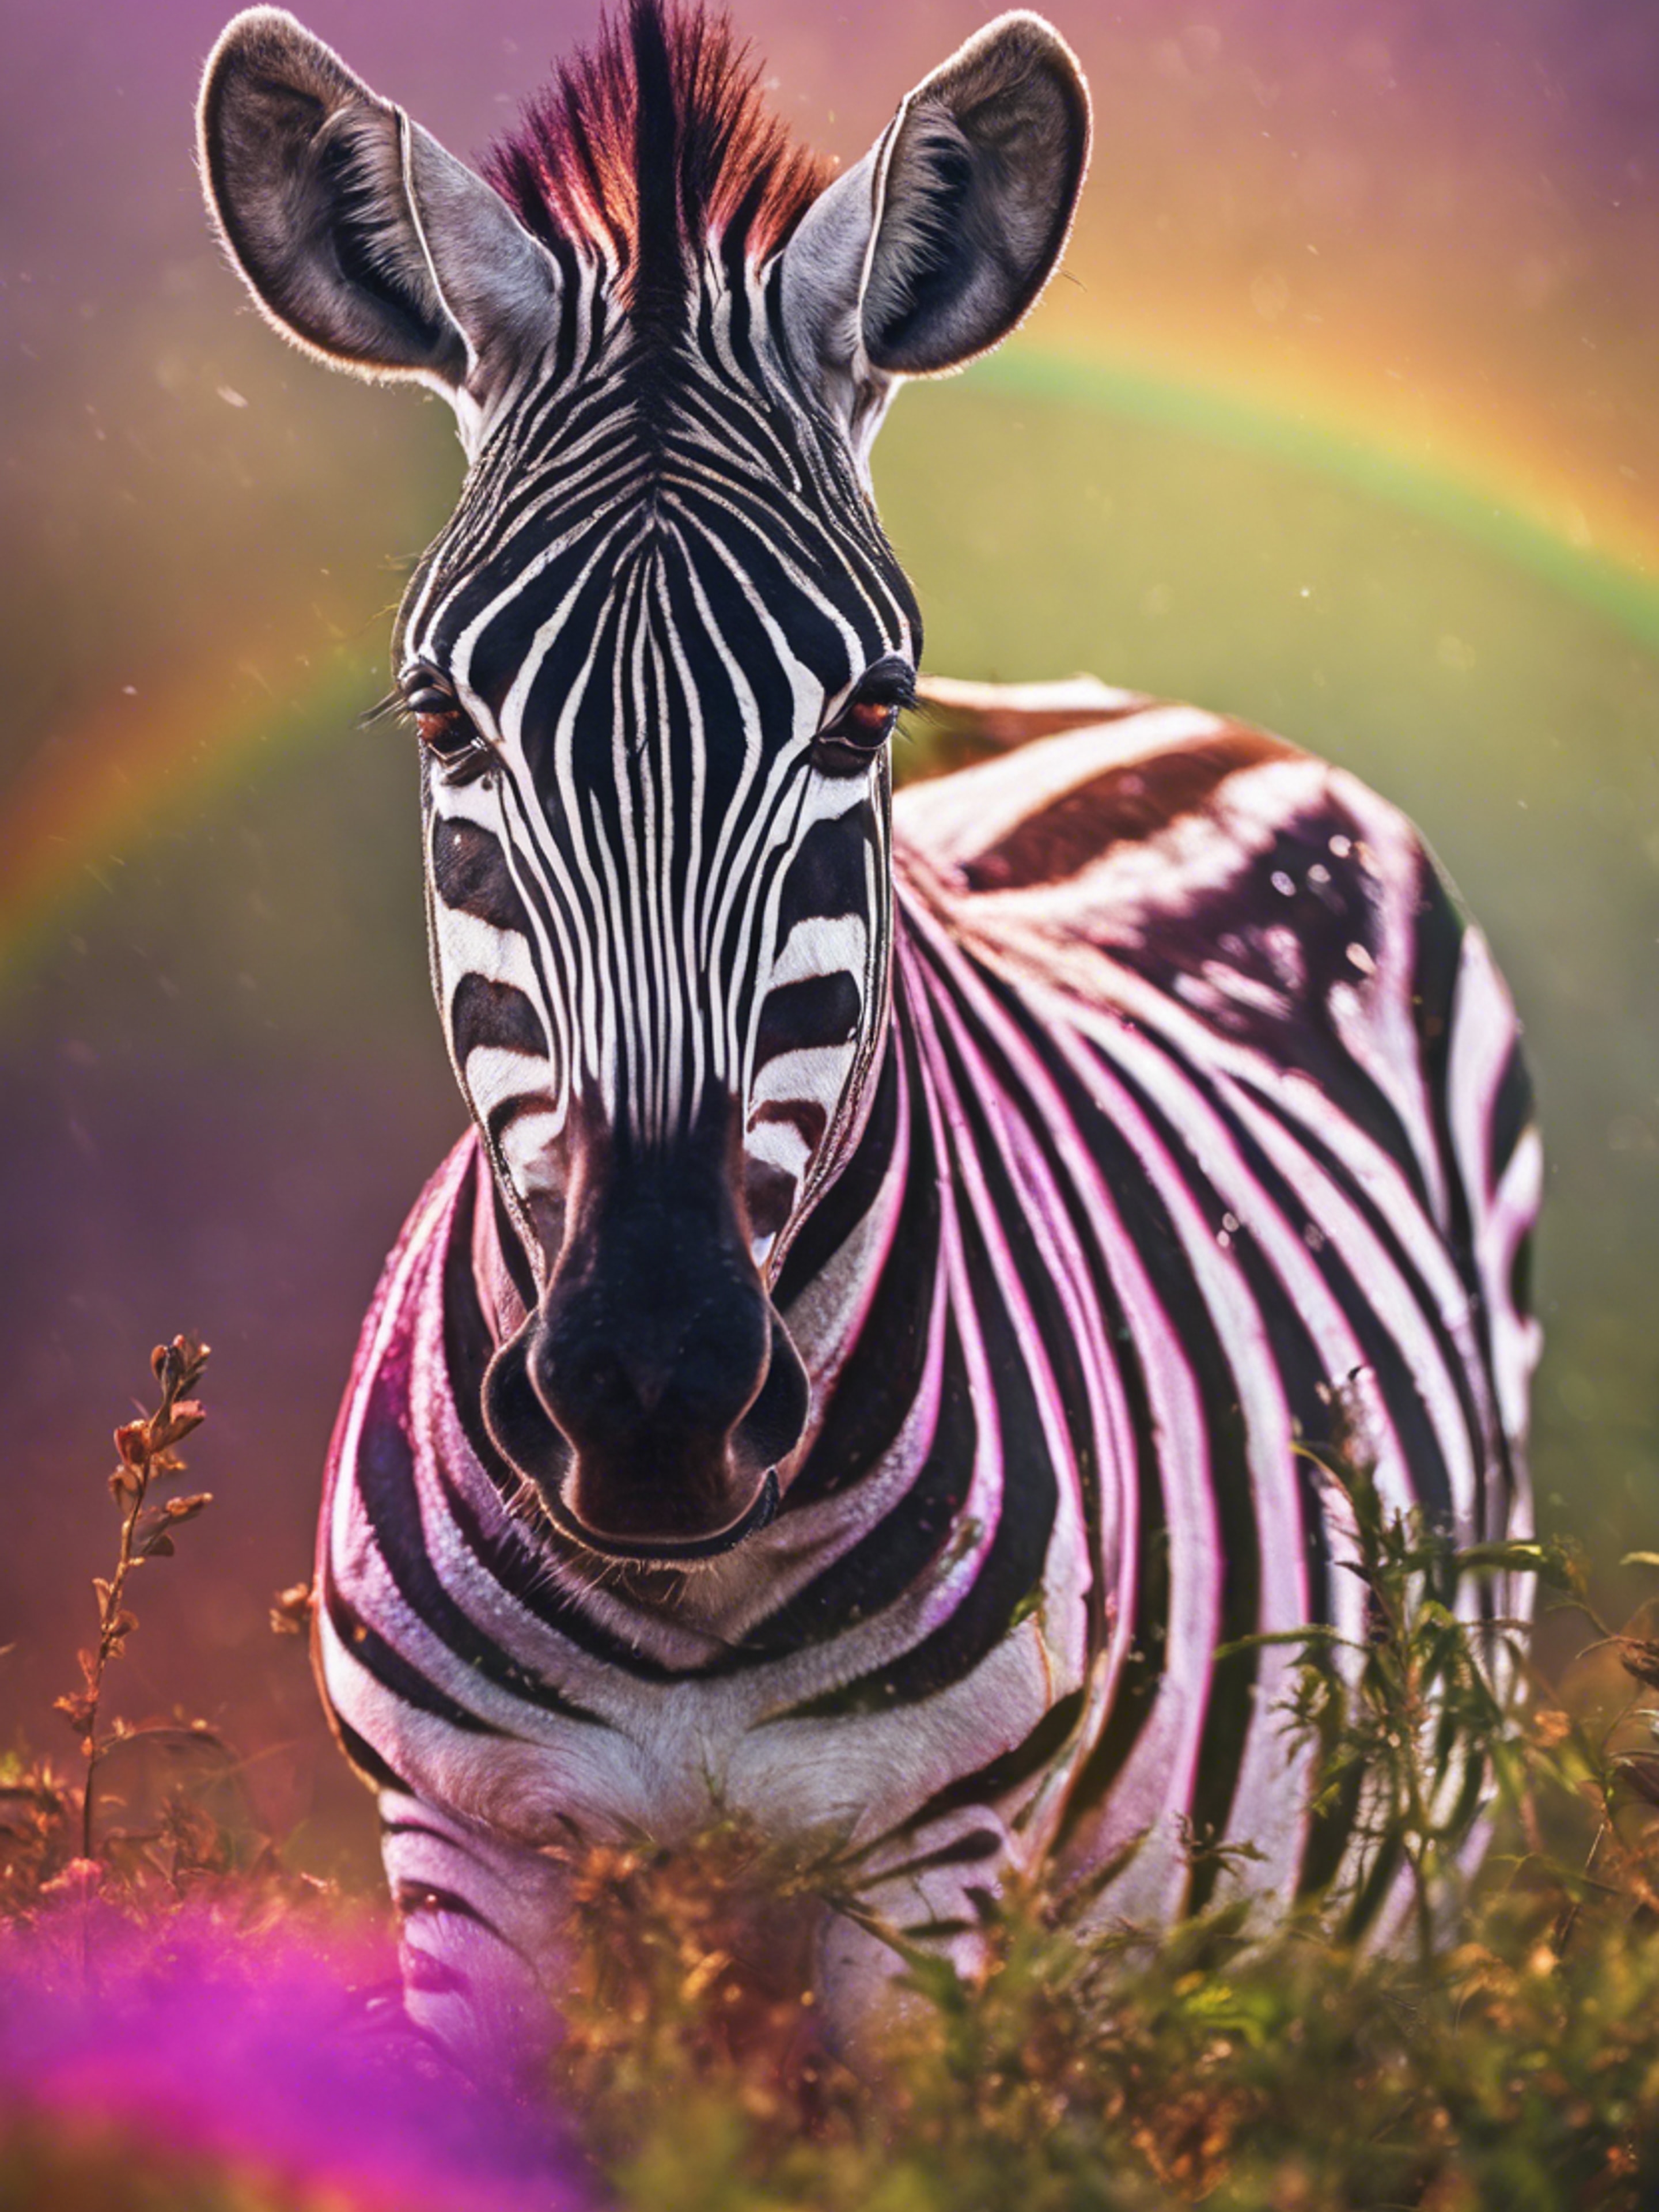 A zebra in the African wild under a vibrant rainbow after a short rain shower.壁紙[a984eacdffd5482bb541]